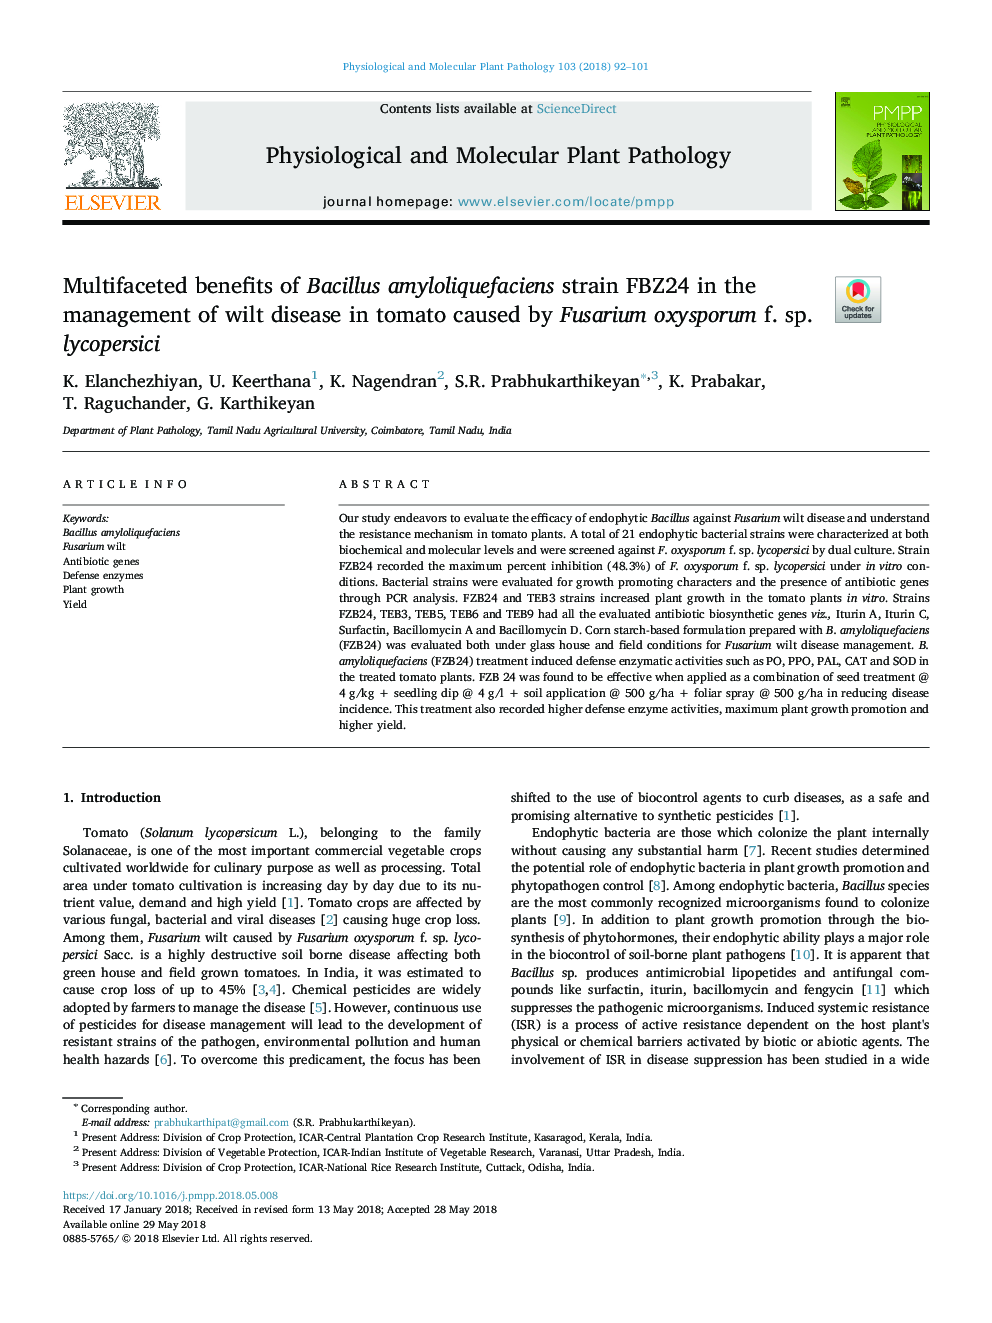 Multifaceted benefits of Bacillus amyloliquefaciens strain FBZ24 in the management of wilt disease in tomato caused by Fusarium oxysporum f. sp. lycopersici